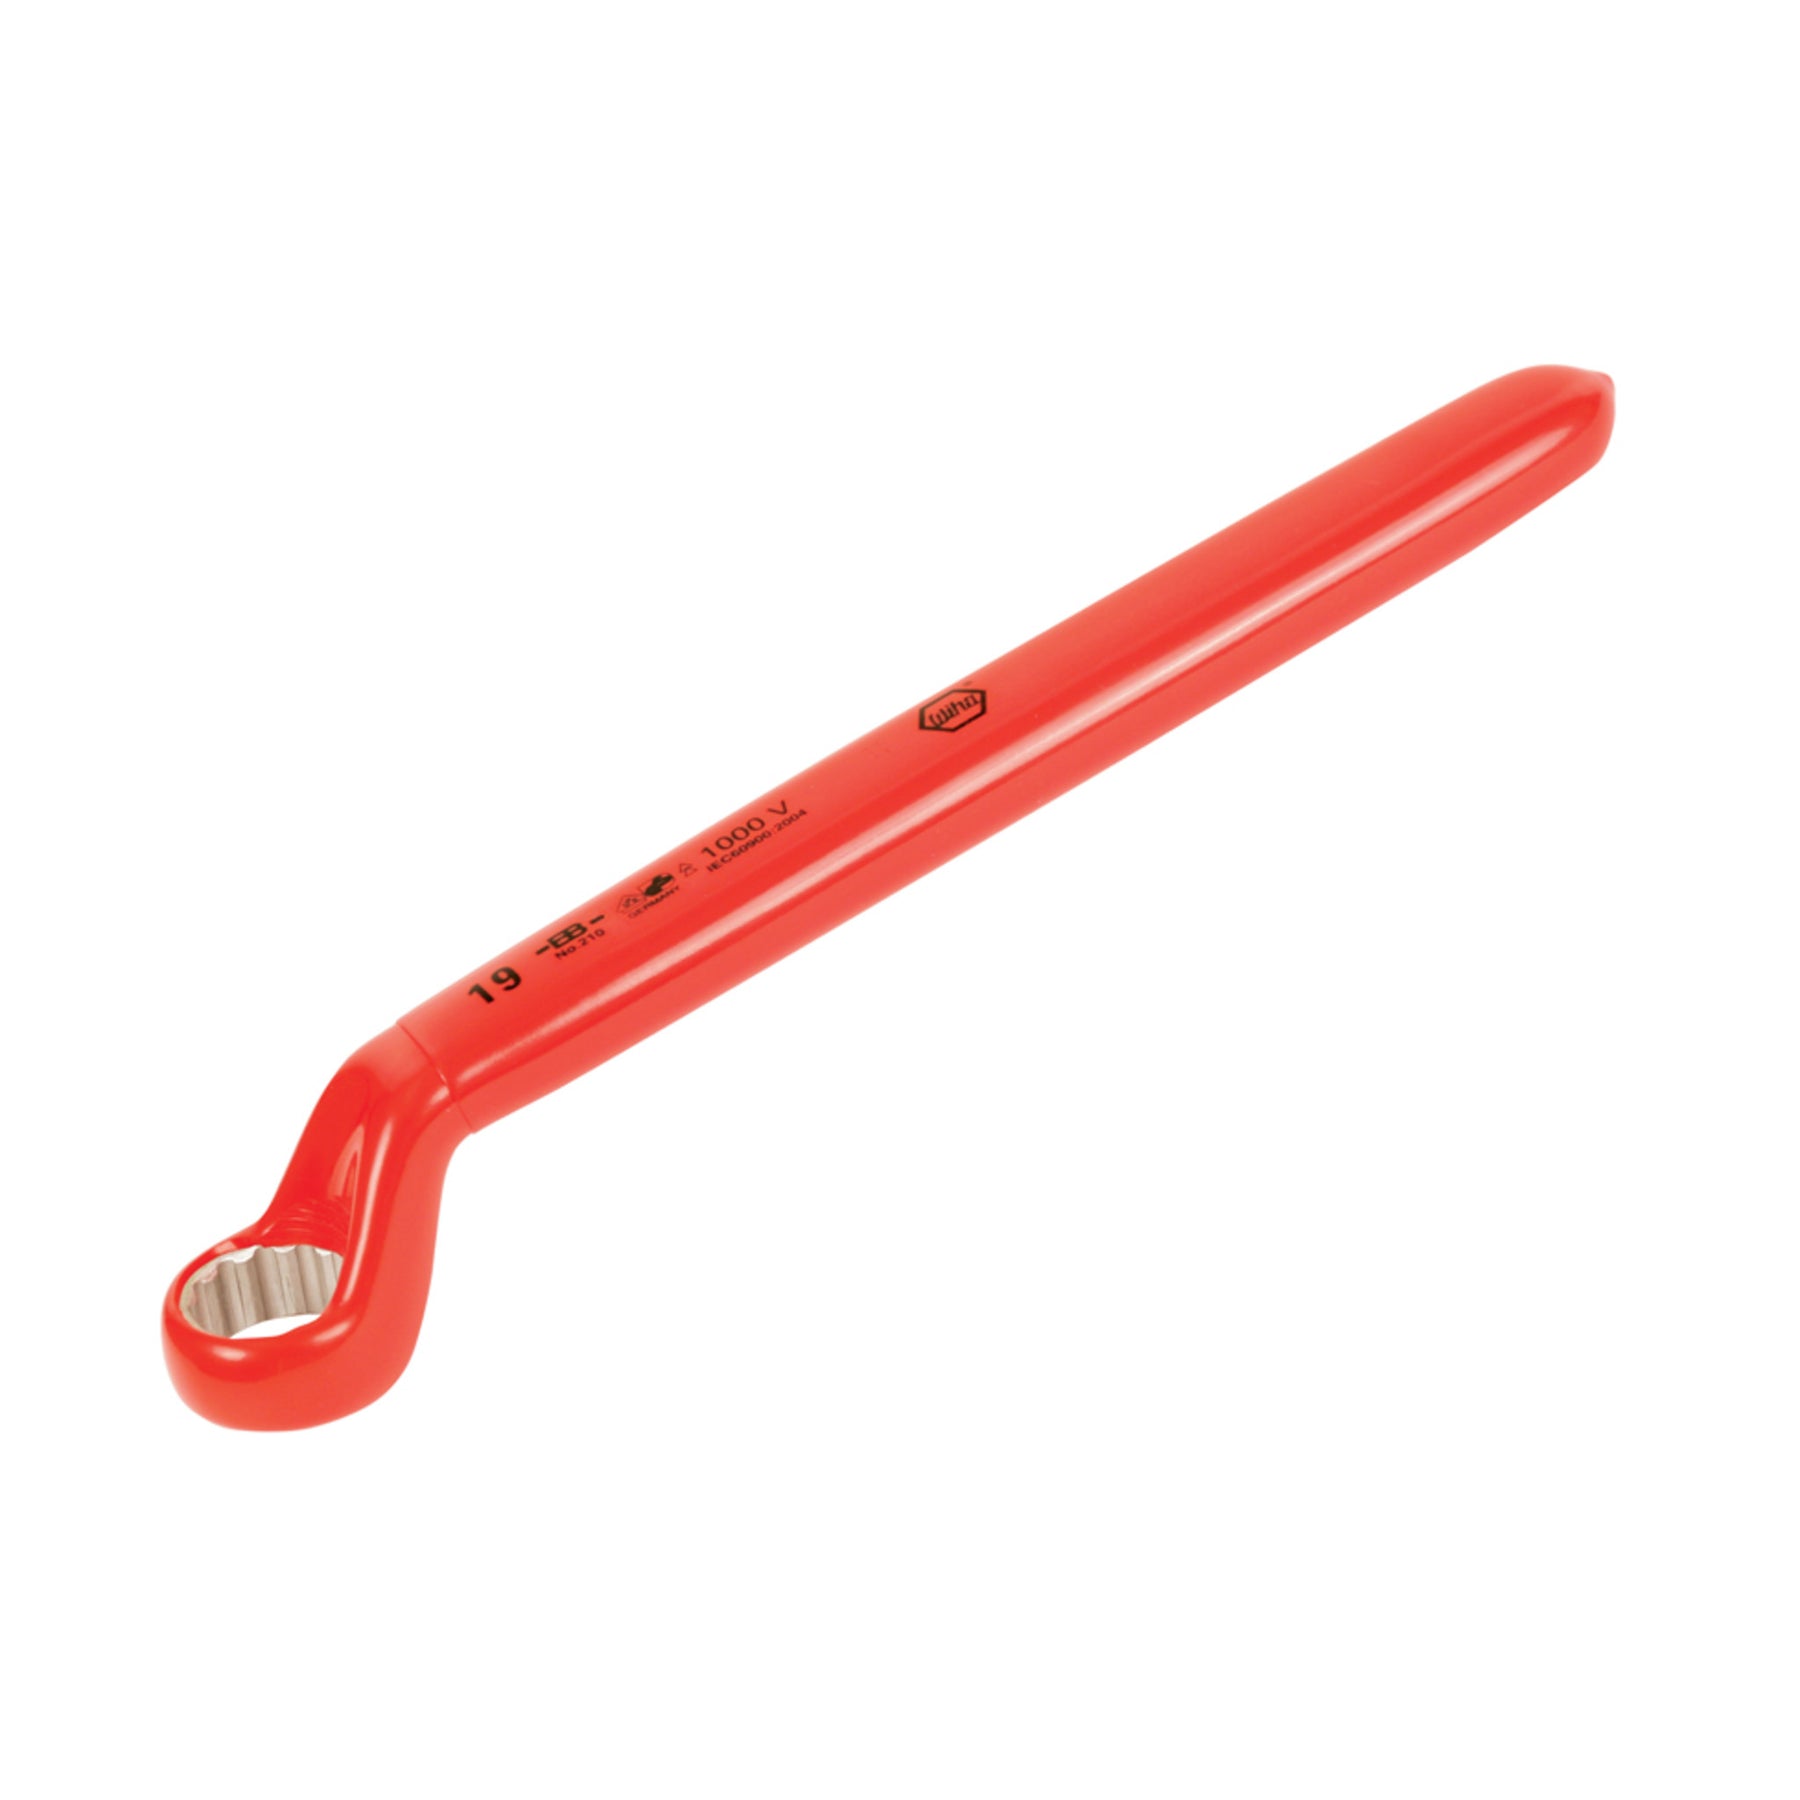 Insulated Deep Offset Wrench 5/8"